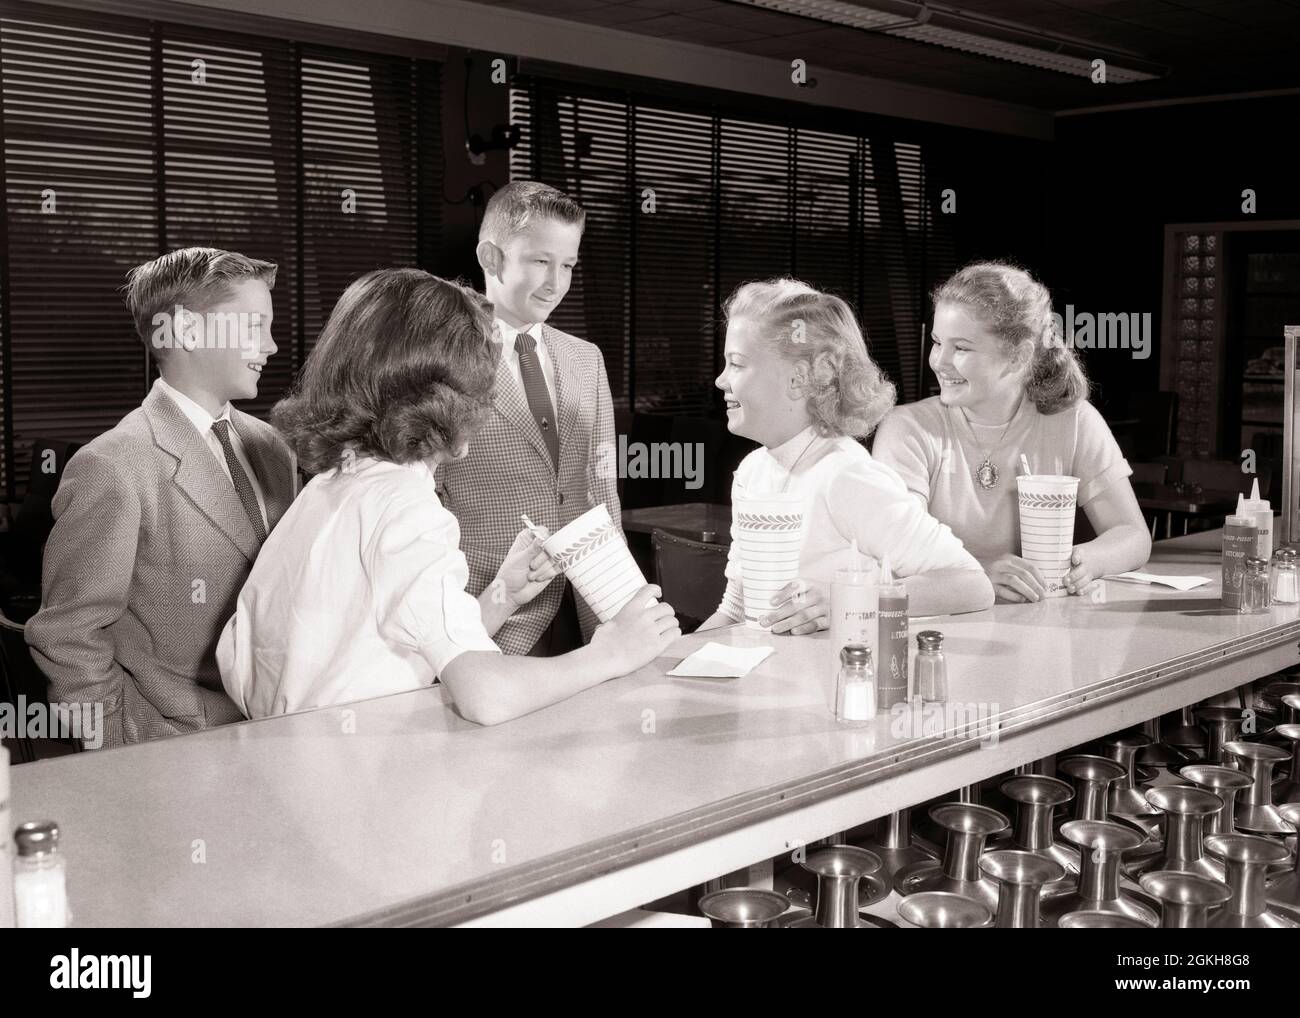 1950s TWO BOYS AND THREE GIRLS TEENAGERS TOGETHER AT SODA FOUNTAIN COUNTER TALKING FLIRTING DRINKING MILK SHAKES - f4510 HAR001 HARS FOUNTAIN RELATIONSHIP SOCIAL OLD TIME FLIRT NOSTALGIA OLD FASHION T JUVENILE STYLE COMMUNICATION LAUGH PLEASED JOY LIFESTYLE FEMALES 5 COPY SPACE FRIENDSHIP HALF-LENGTH PERSONS MALES TEENAGE BOY CONFIDENCE B&W DATING SUIT AND TIE HAPPINESS CHEERFUL LEISURE AND EXCITEMENT AT ATTRACTION SMILES COURTSHIP JOYFUL STYLISH TEENAGED POSSIBILITY JUVENILES PRE-TEEN SHAKES SOCIAL ACTIVITY TOGETHERNESS BLACK AND WHITE CAUCASIAN ETHNICITY COURTING HAR001 OLD FASHIONED Stock Photo